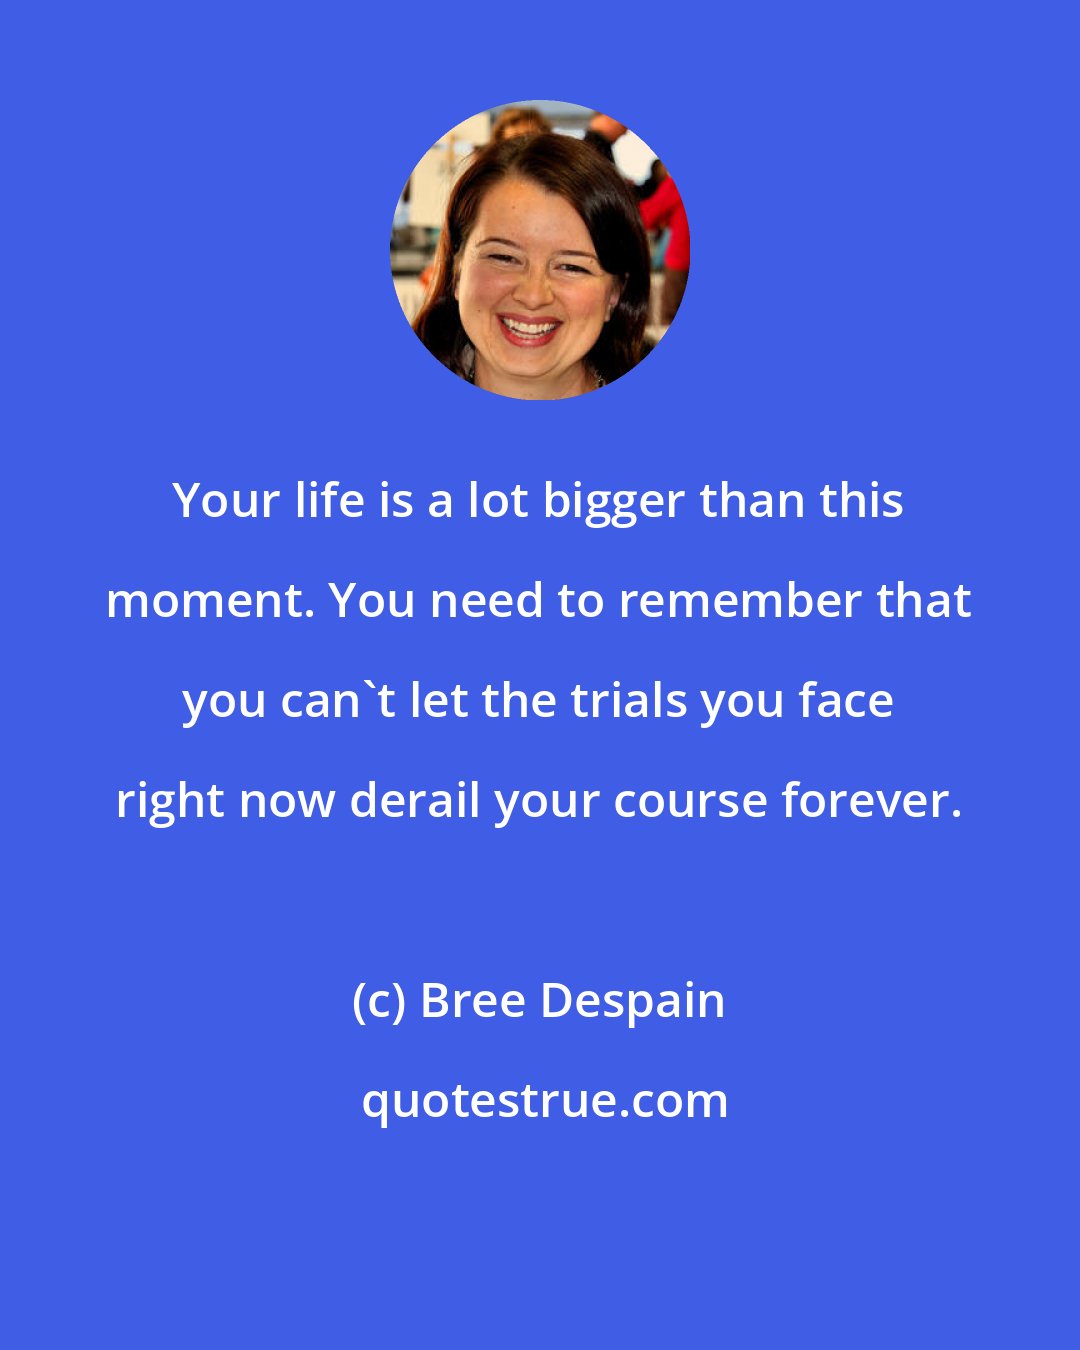 Bree Despain: Your life is a lot bigger than this moment. You need to remember that you can't let the trials you face right now derail your course forever.